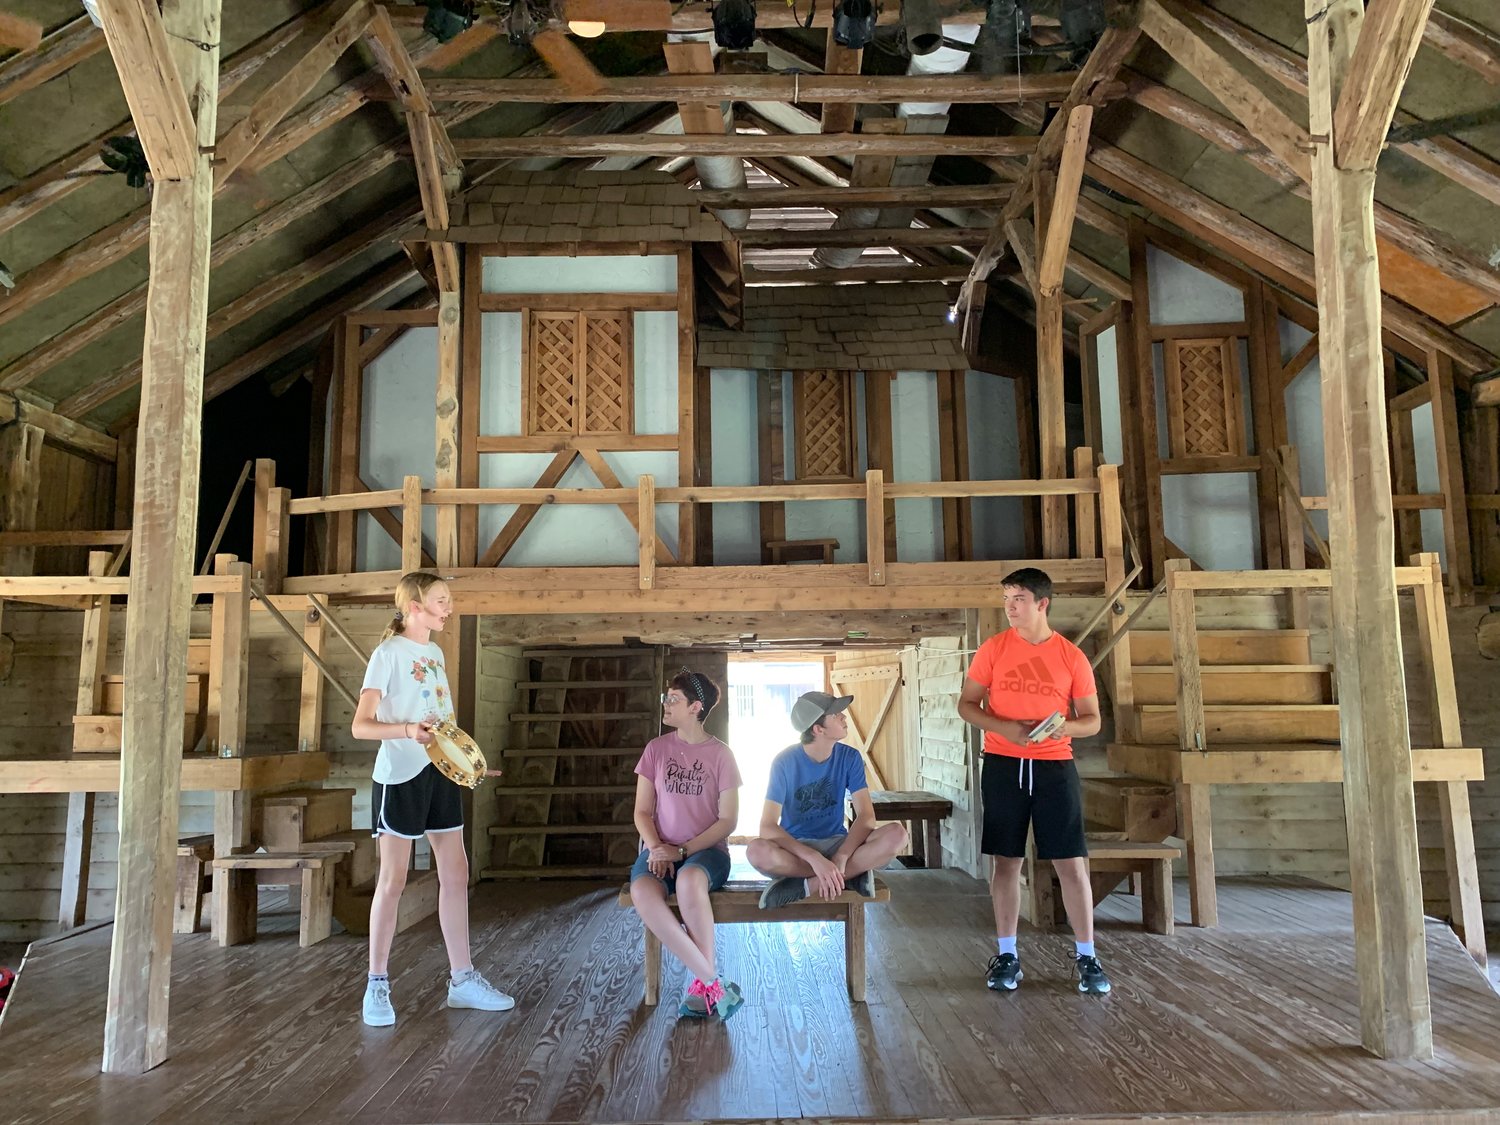 The Crystal Theatre Shakespeare Ninja program has had a decade-long partnership with Camp Shakespeare at Winedale. This year, two Shakespeare Ninjas are among the 14 first-session campers: Lena Salazar, second from left, and Miguel Moreno, far right. The Winedale Theatre barn, where the camp is held, has been remodeled to resemble the Globe Theatre in Great Britain.